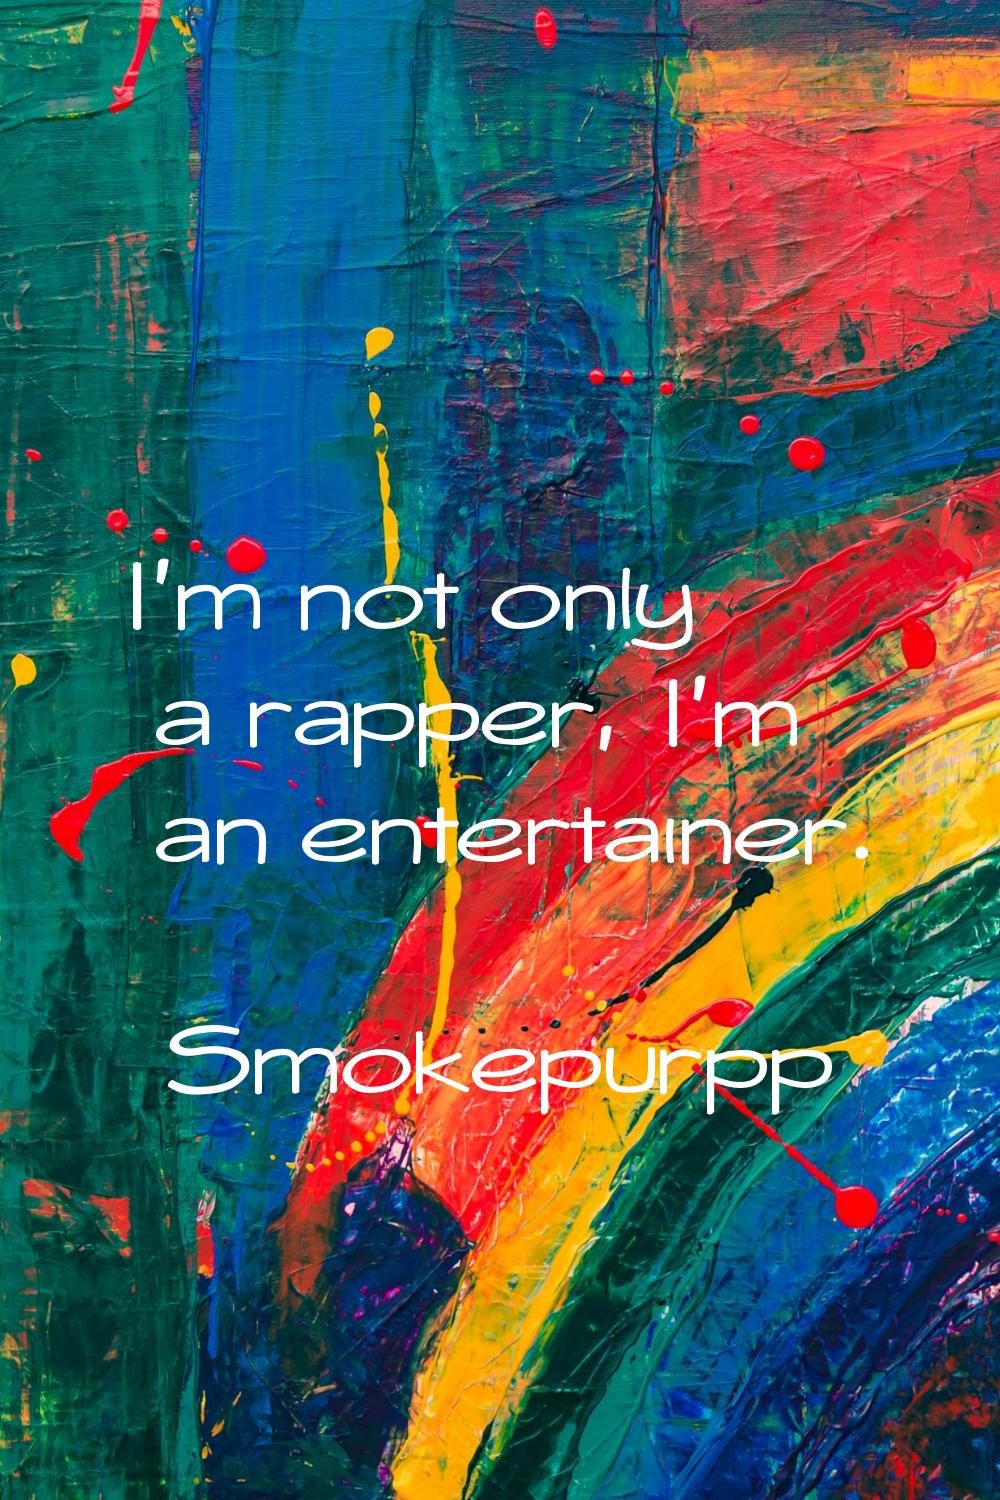 I'm not only a rapper, I'm an entertainer.